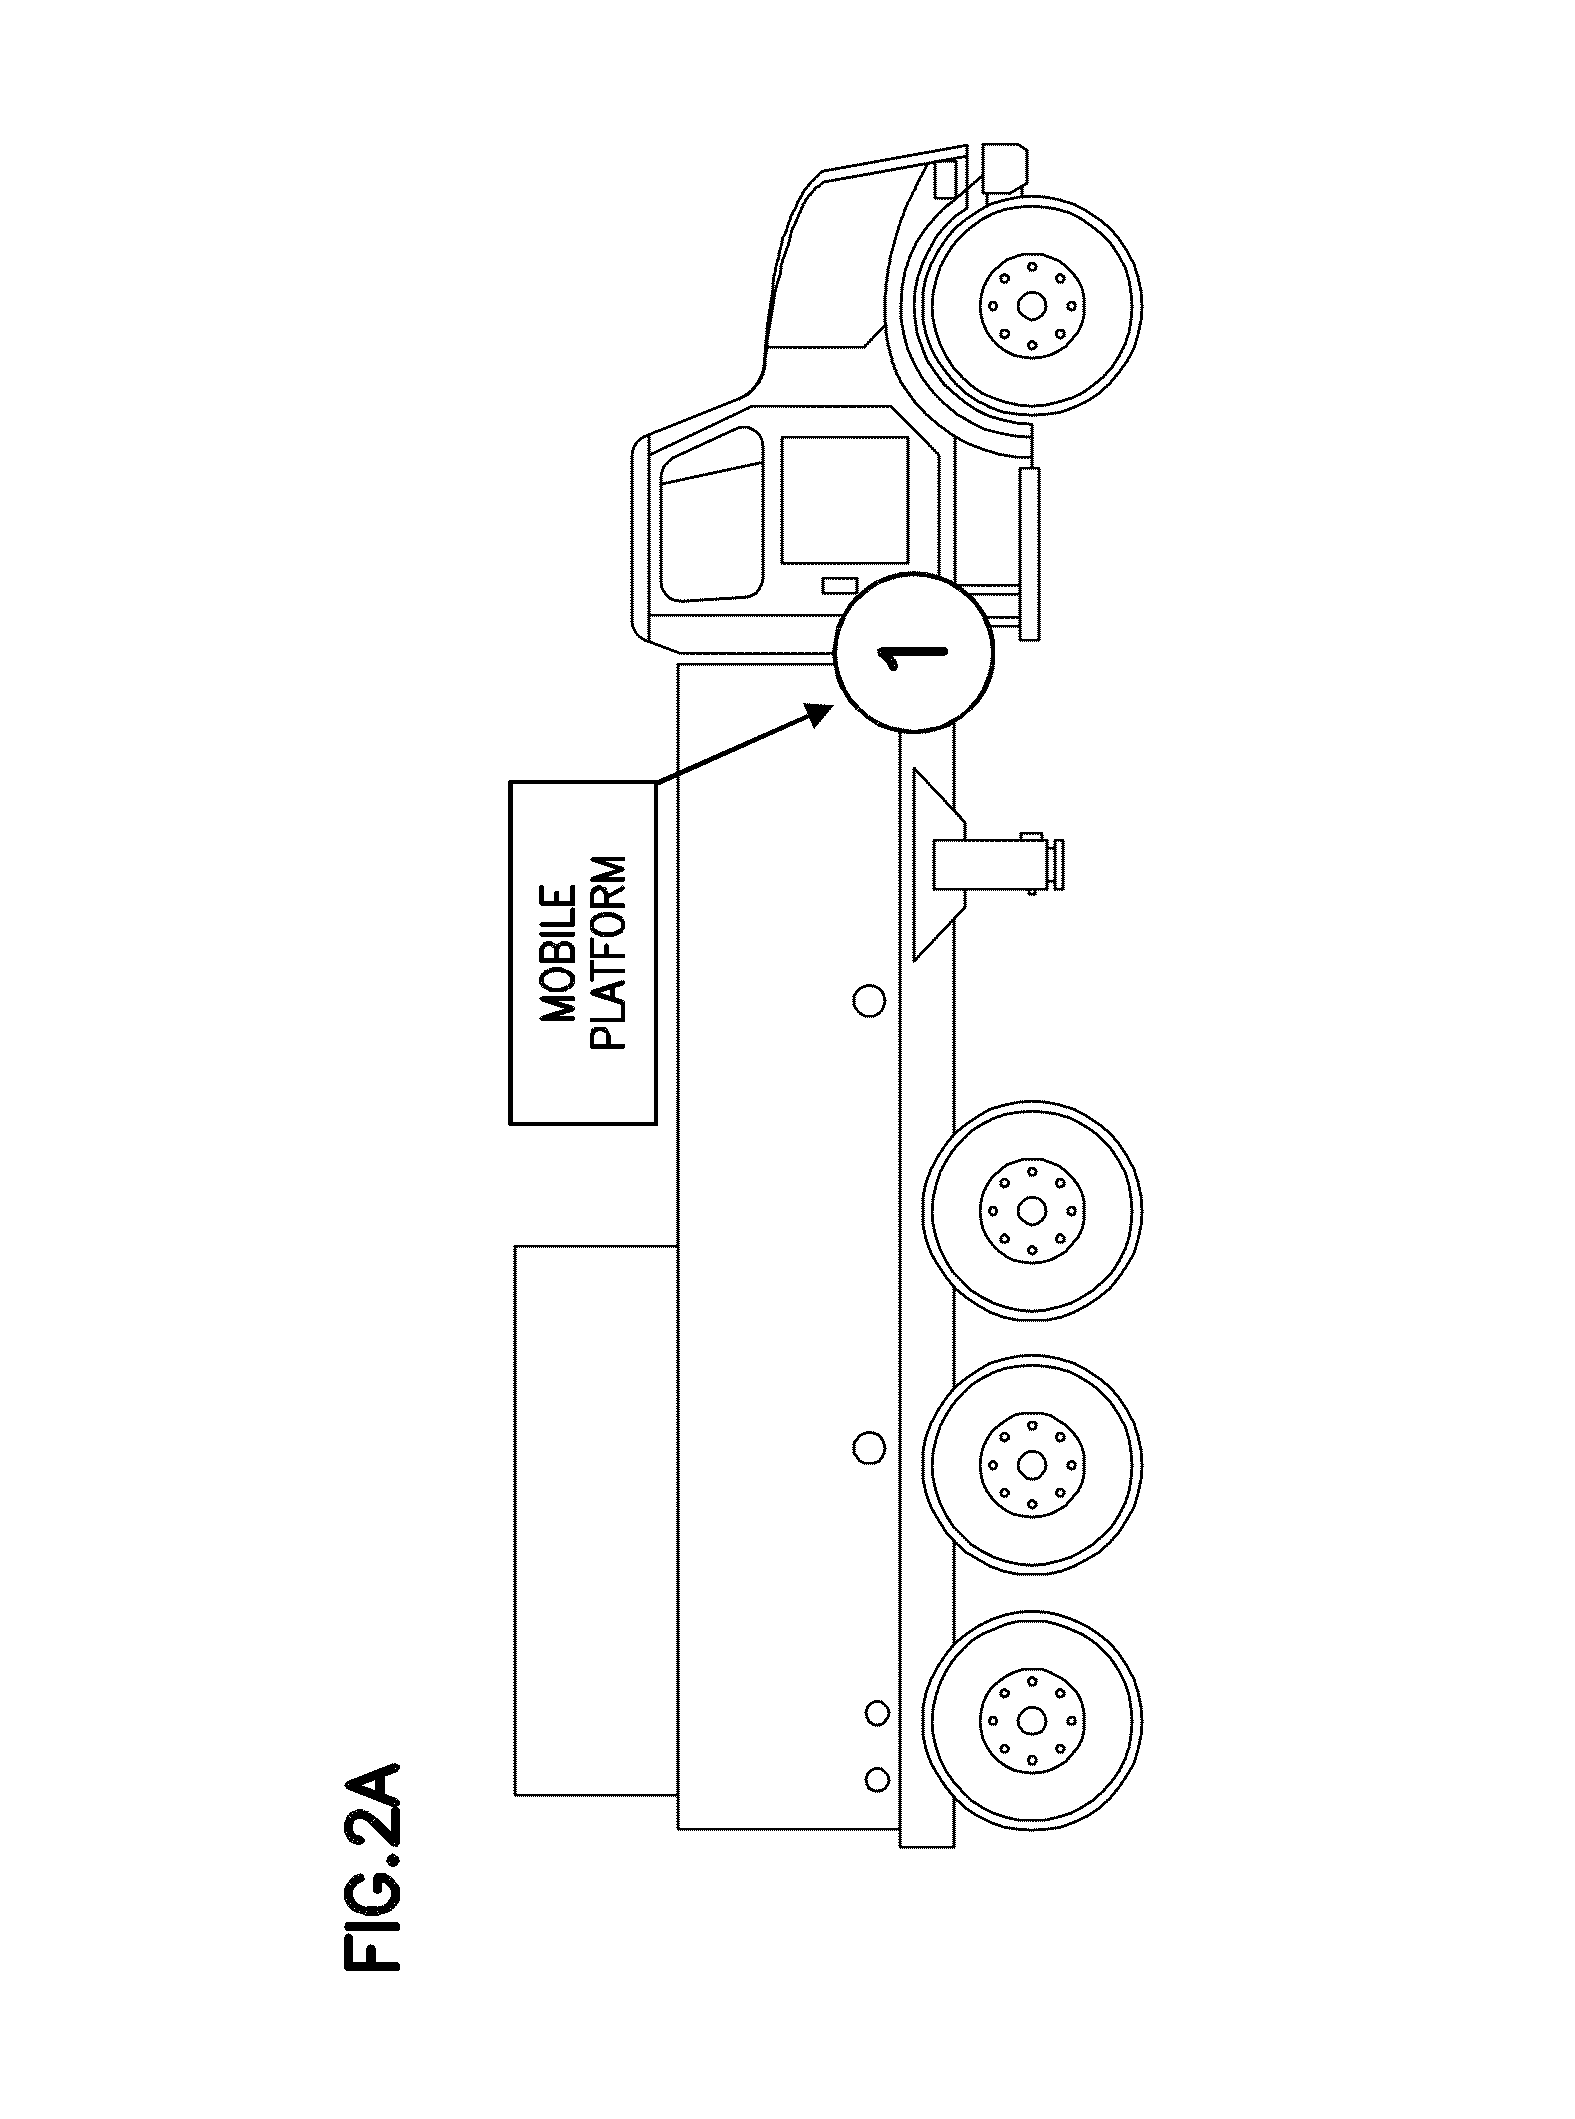 Devices for crude oil treatment and upgrading